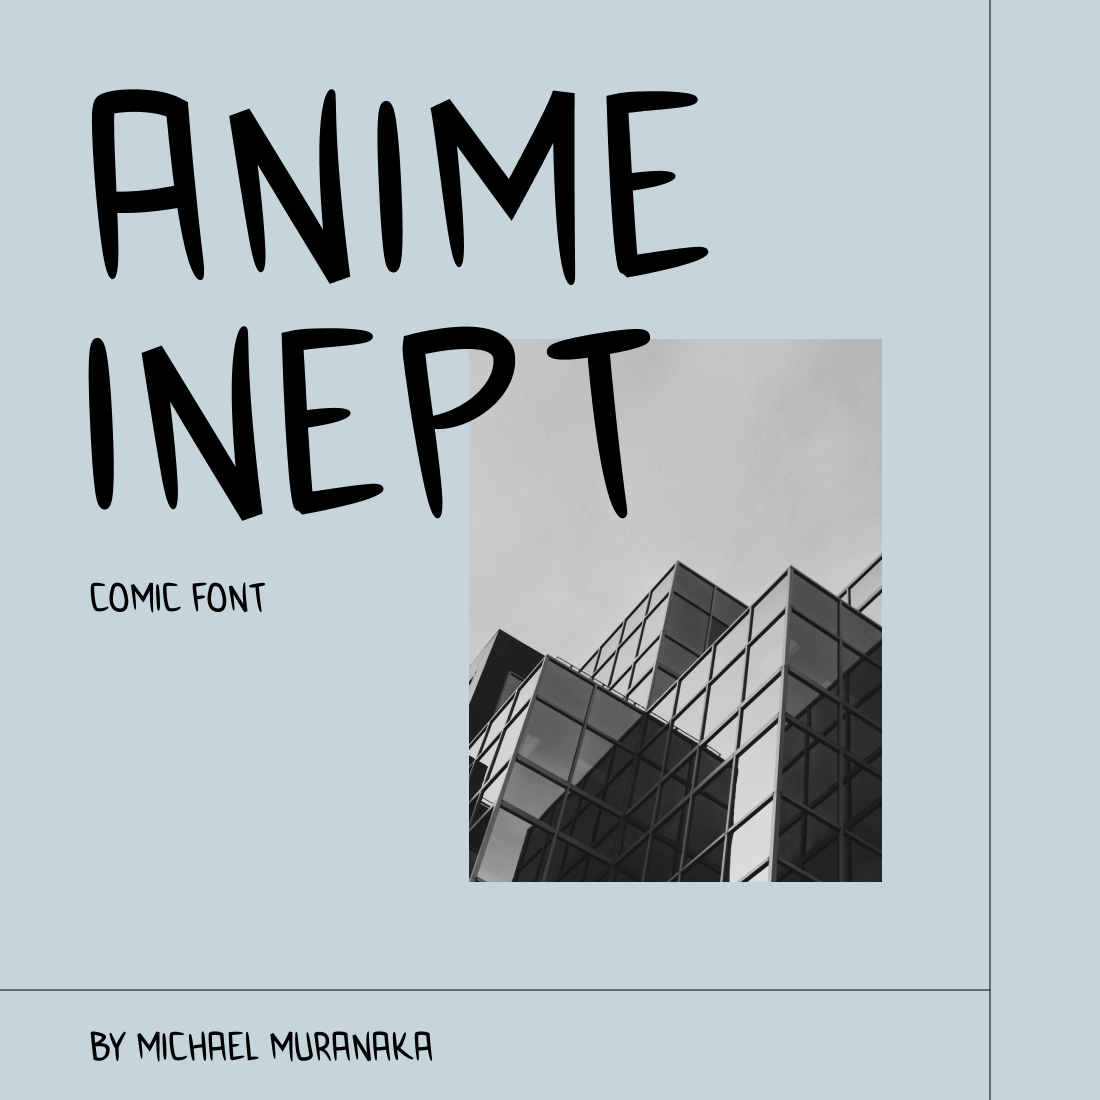 Anime Inept Free Font cover image.